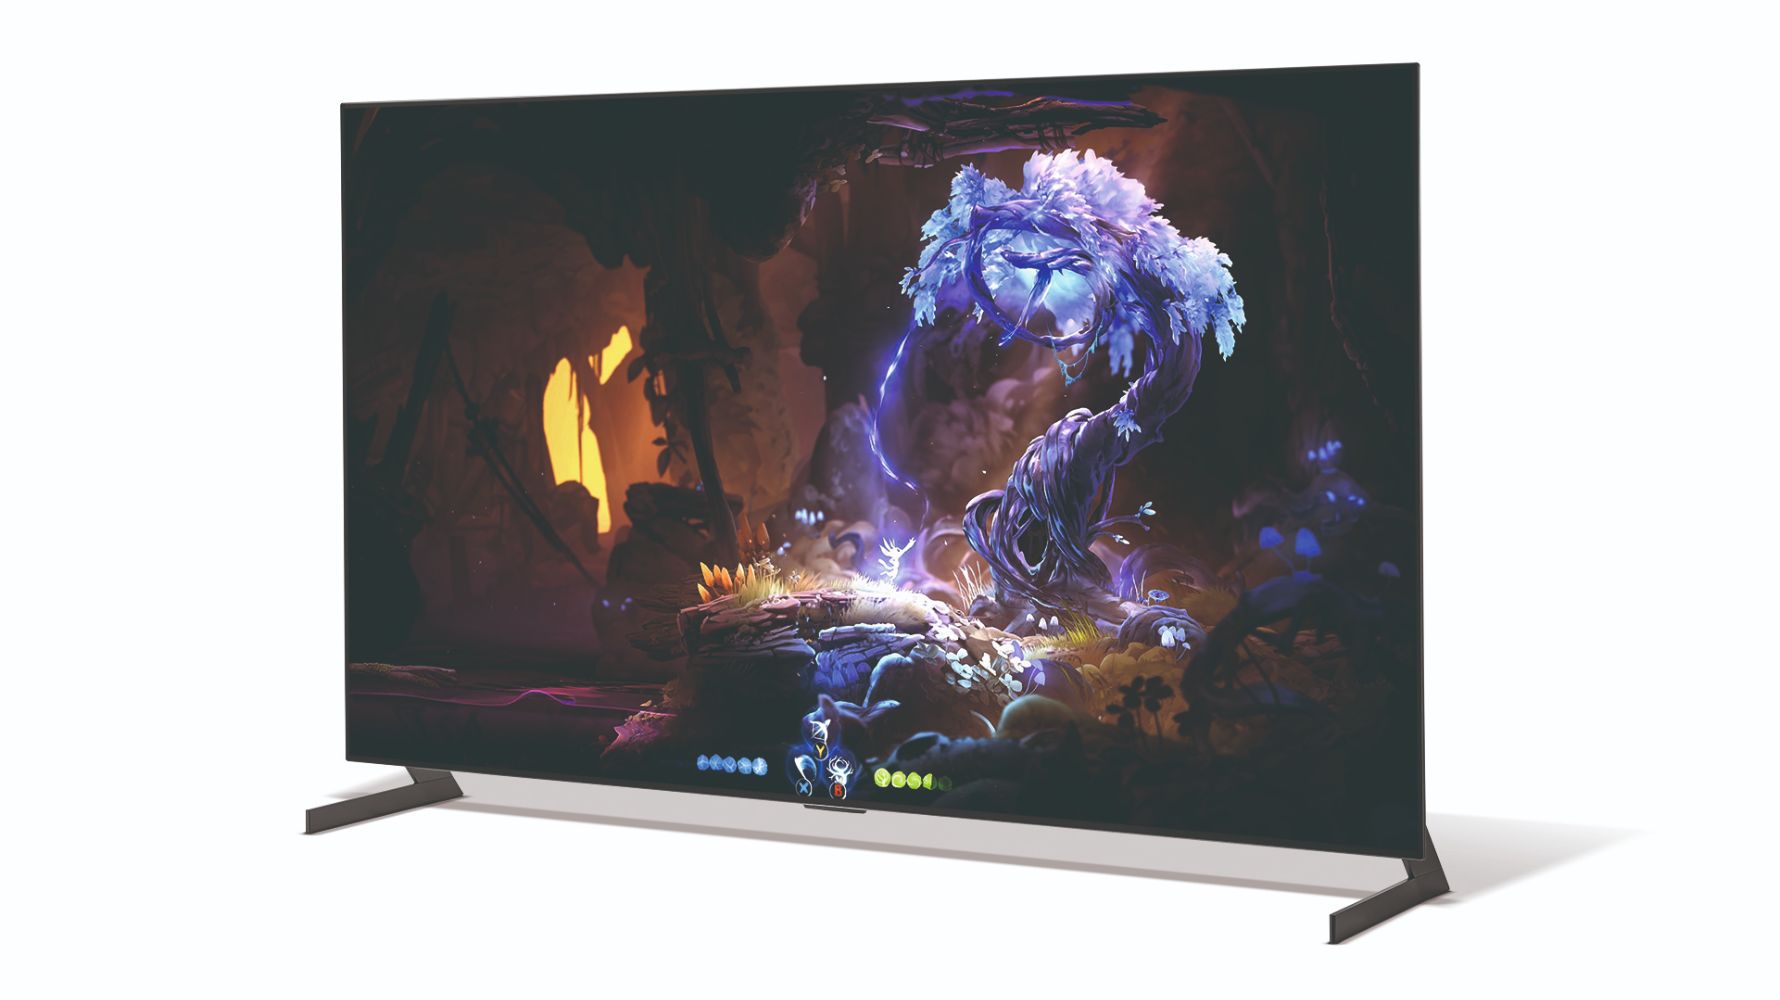 Who Has The Best Warranty On LG OLED TV Purchases